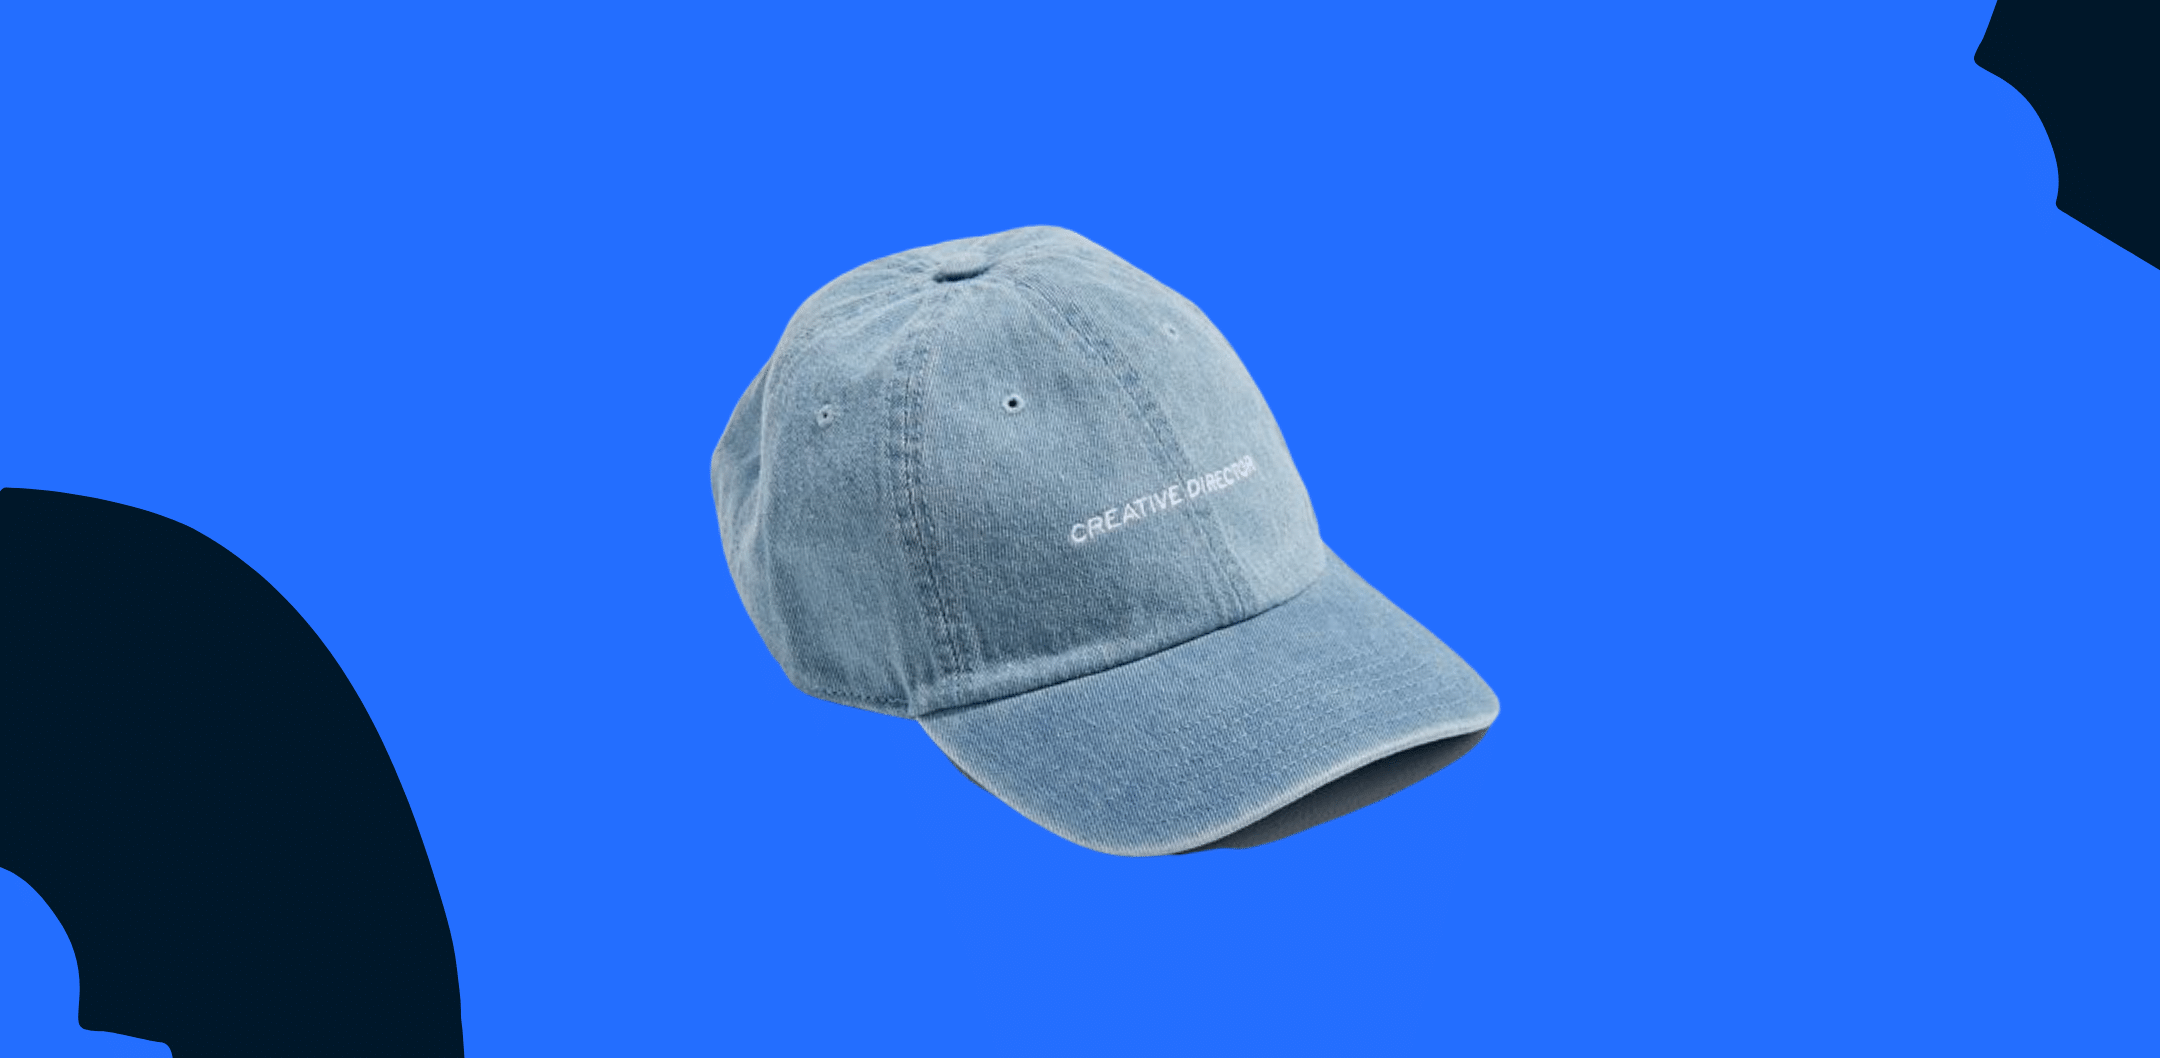 baseball cap with a on it